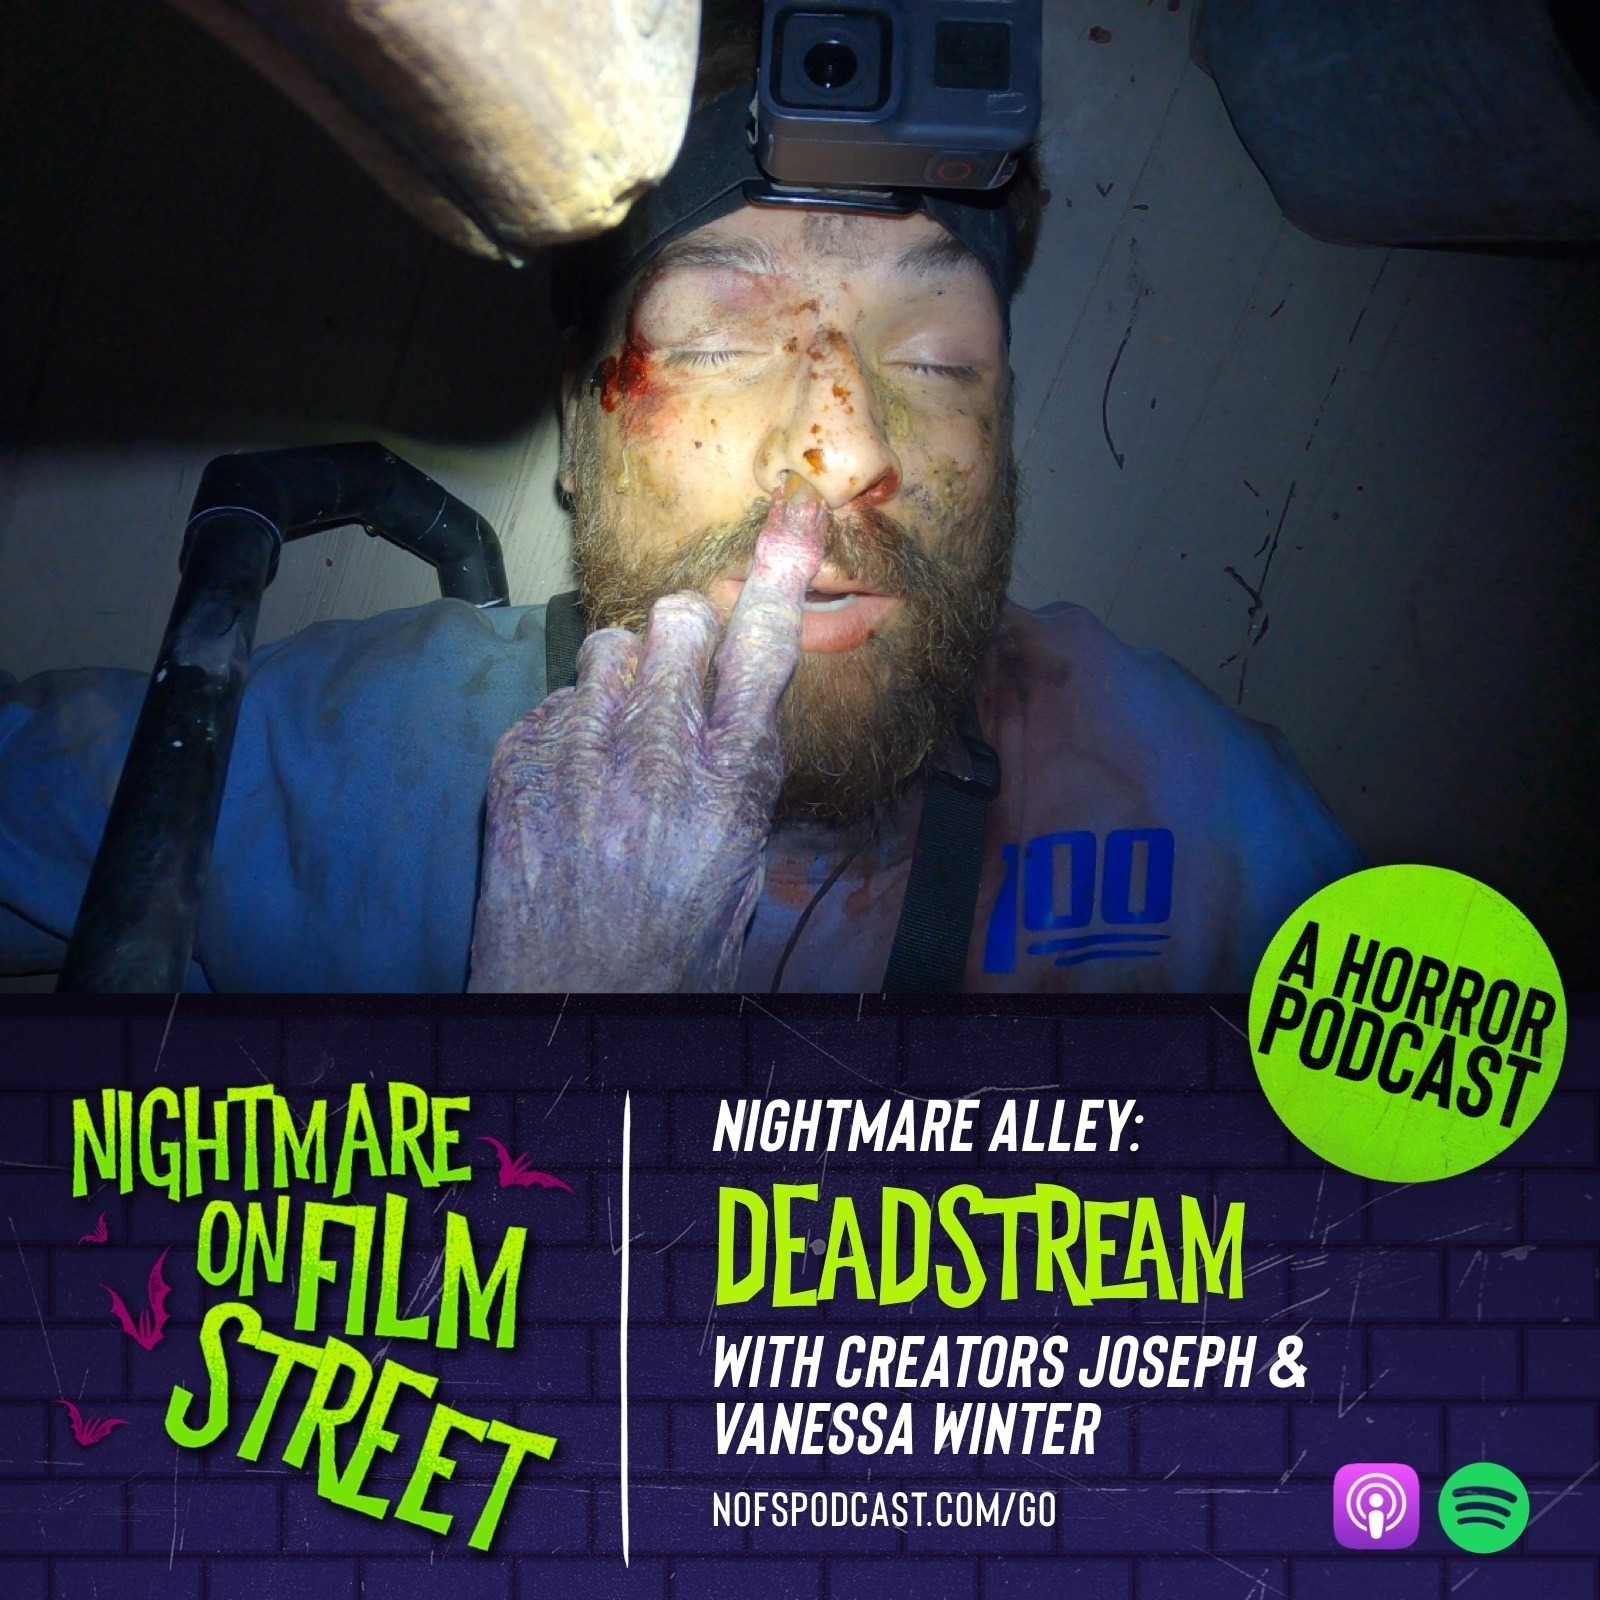 [Nightmare Alley] DEADSTREAM Interview with with Creators Joseph and Vanessa Winter